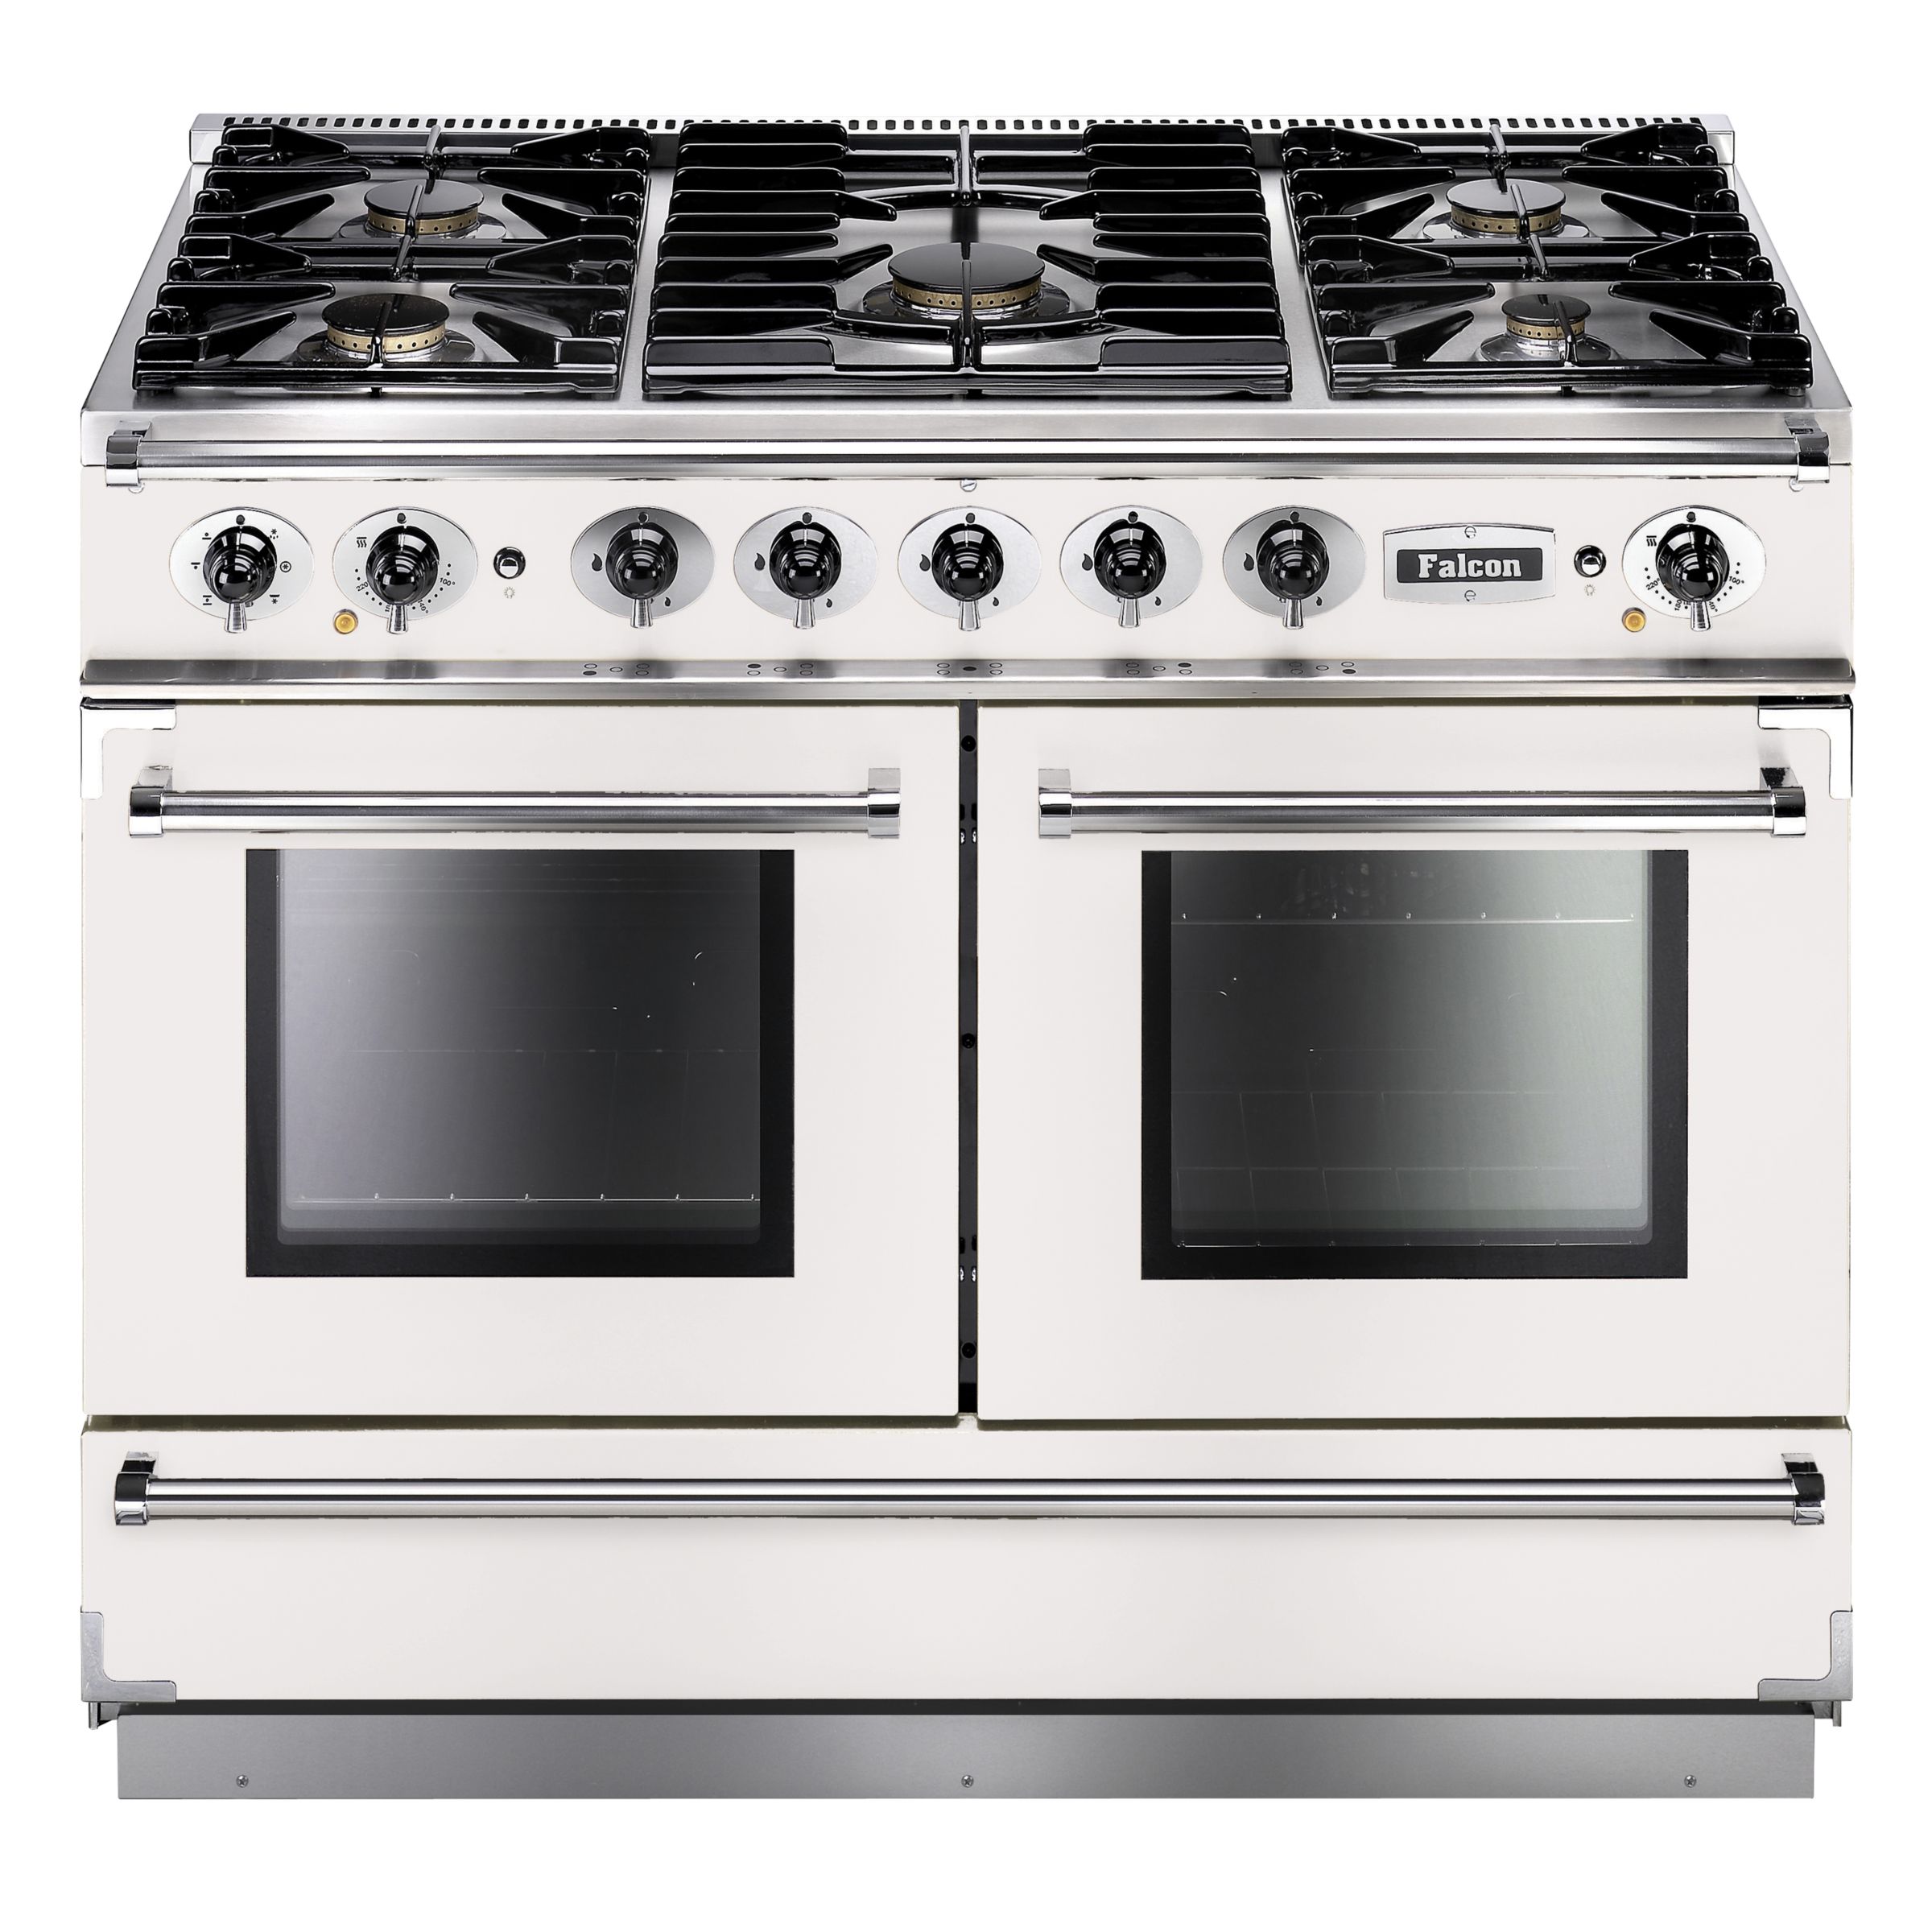 Falcon Continental 1092 DFWH/NG Dual Fuel Range Cooker, White at John Lewis